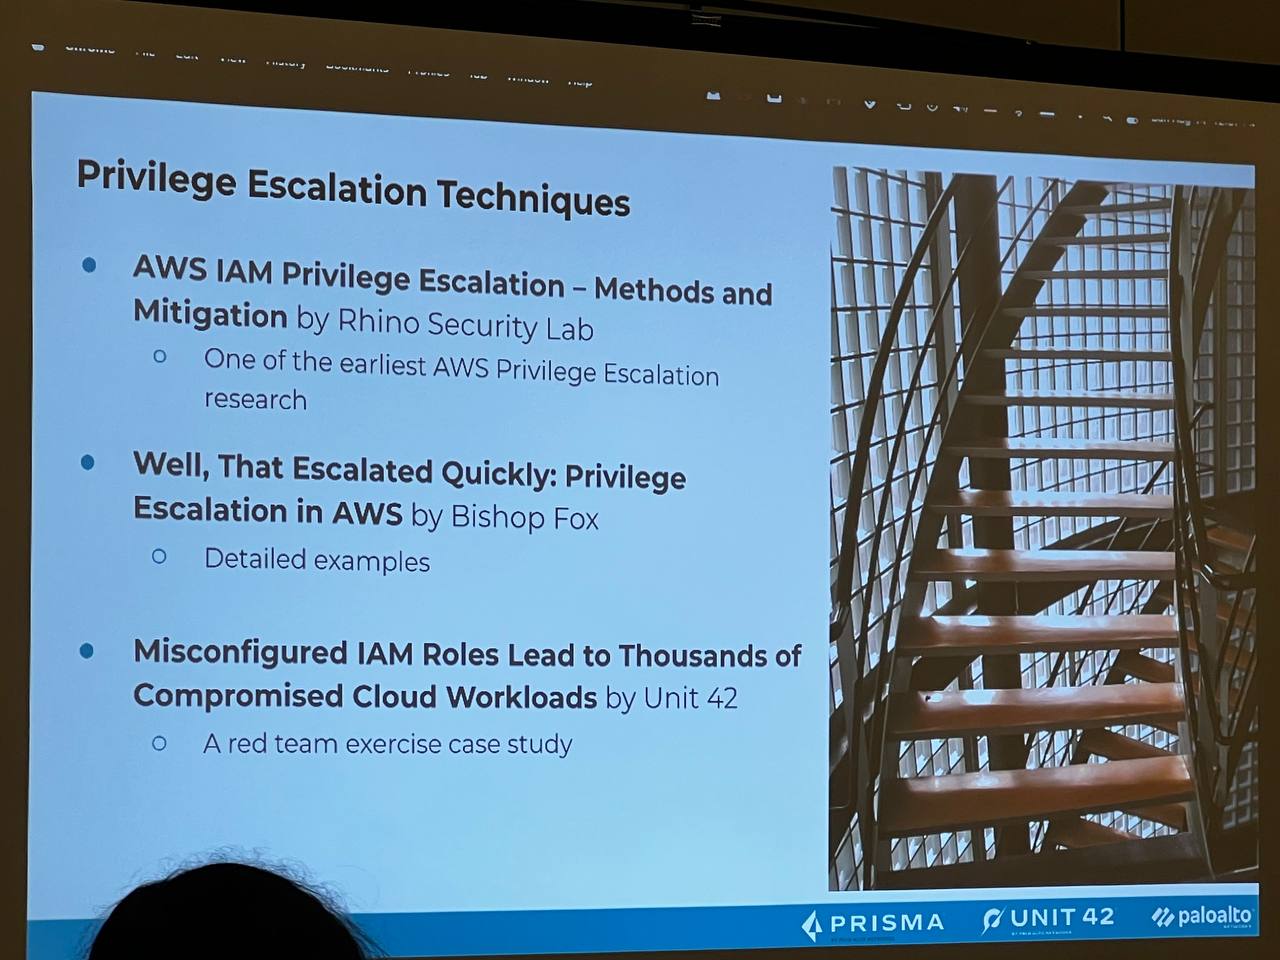 Privilege escalation techniques. IAM escalation methods by rhino security lab. Privilege escalation. Misconfigured IAM roles lead to thousands of compromised cloud workloads.